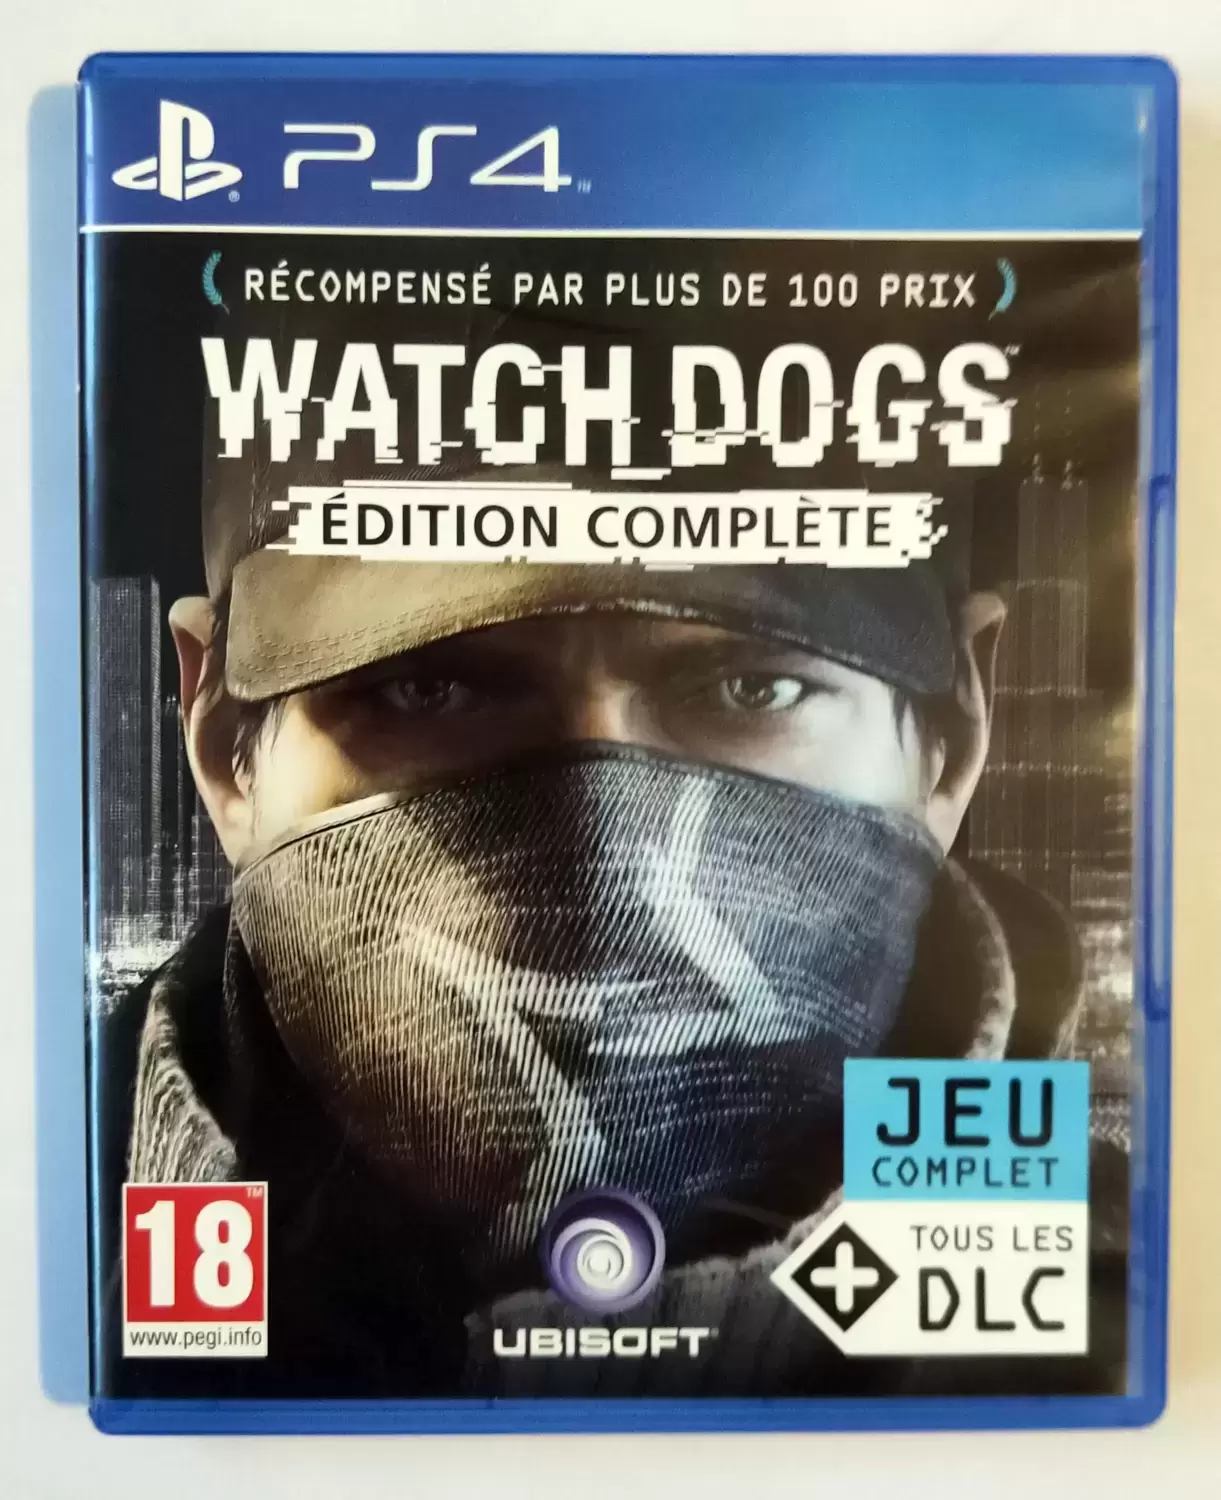 PS4 Games - Watch Dogs: Complete Edition